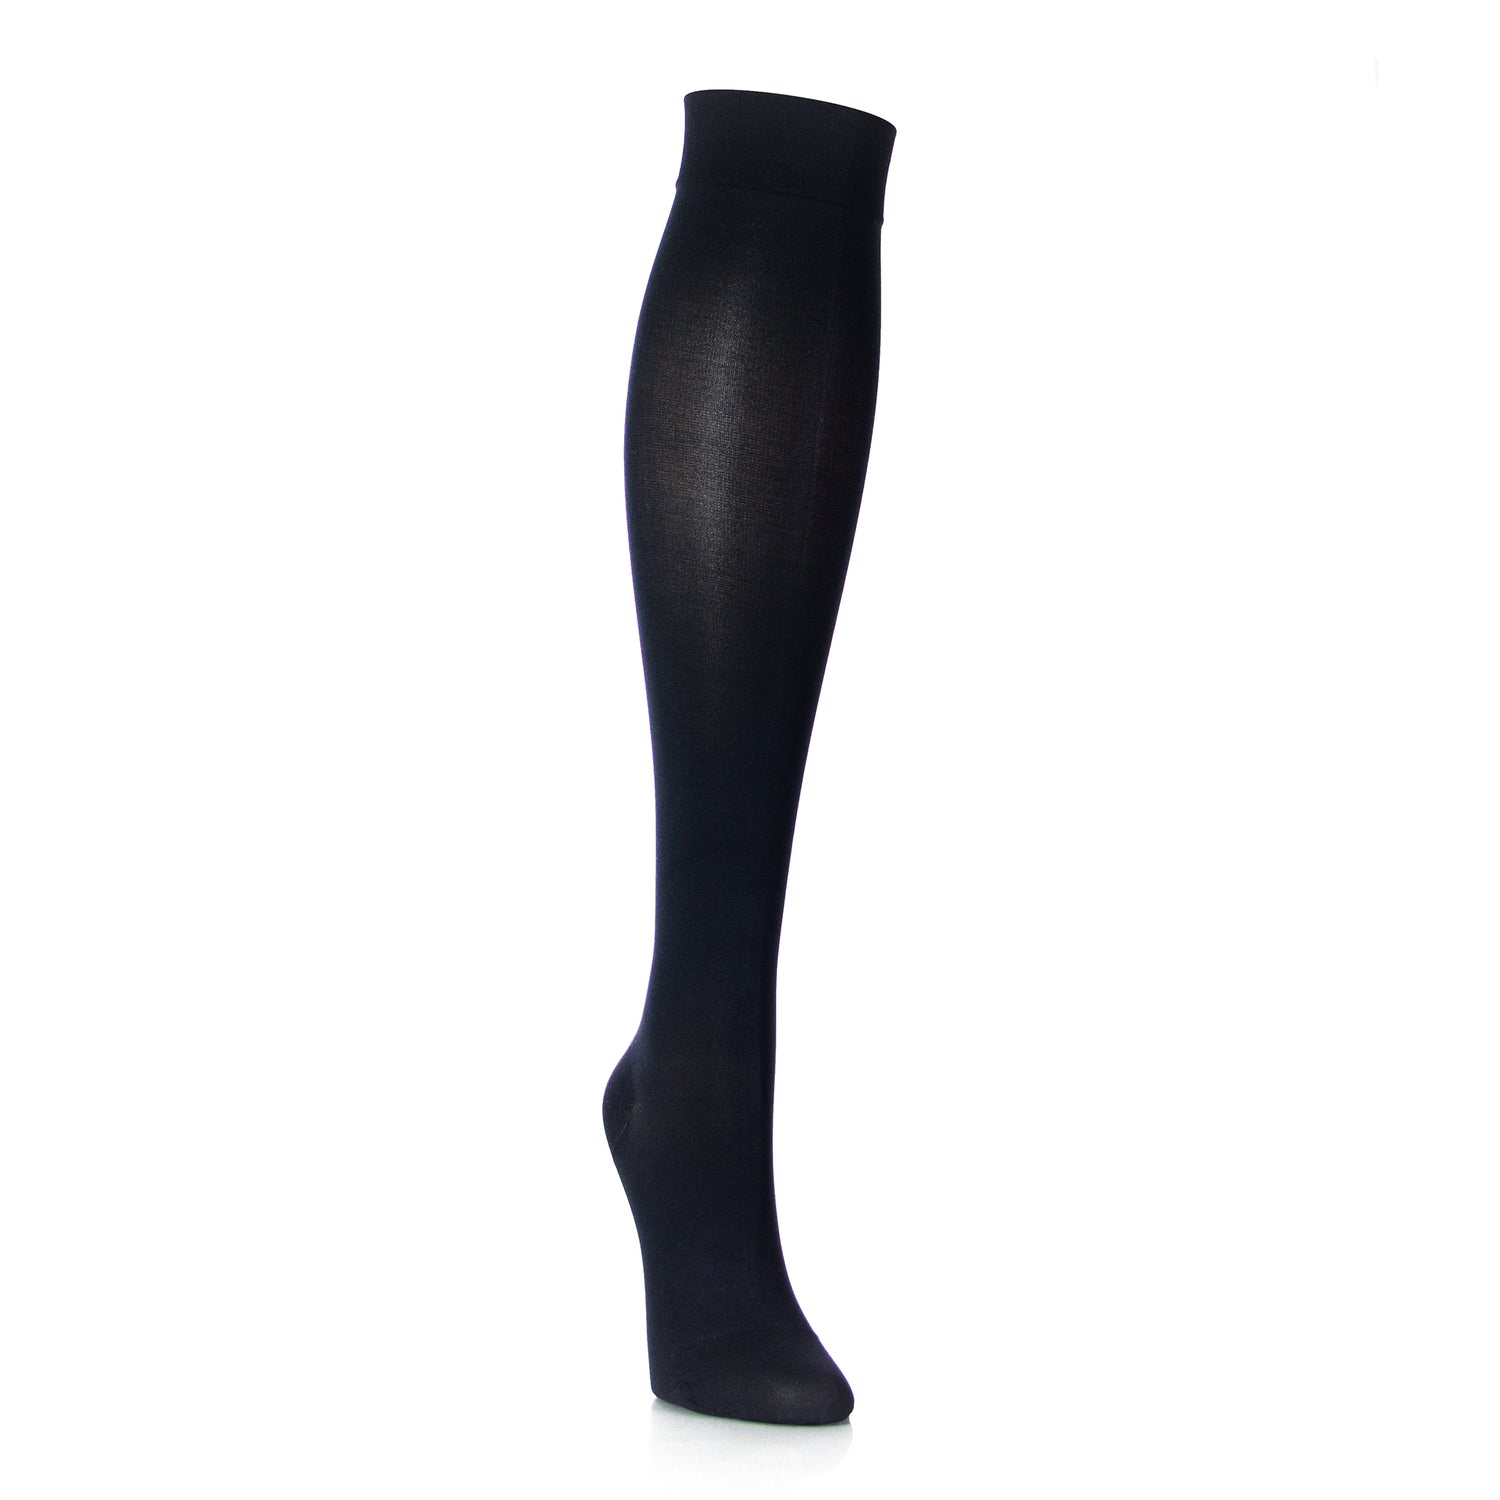 Circutrend Knee High Compression Socks For Women In 20 30 mmHg